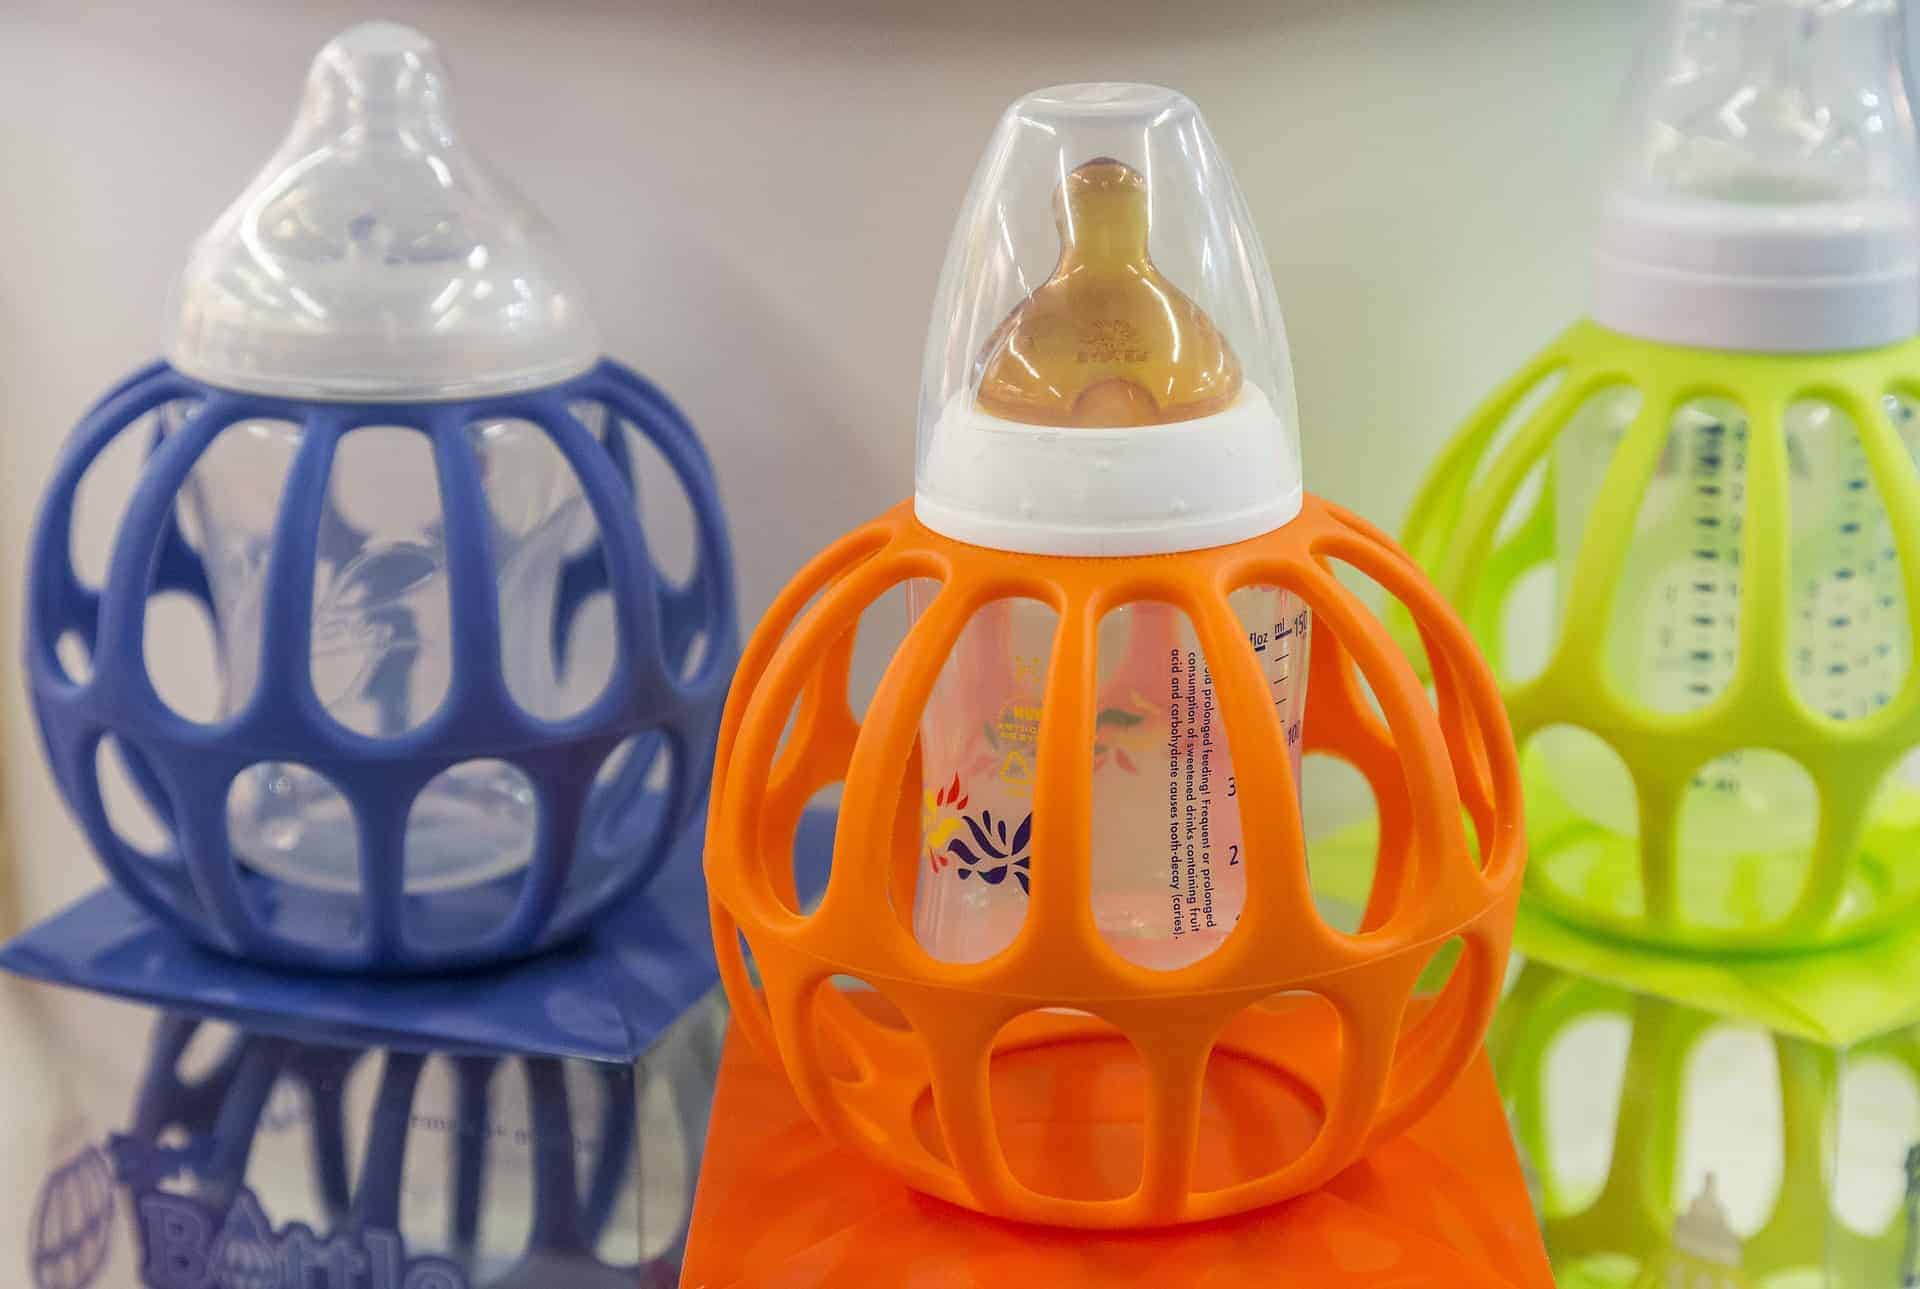 baby bottle products